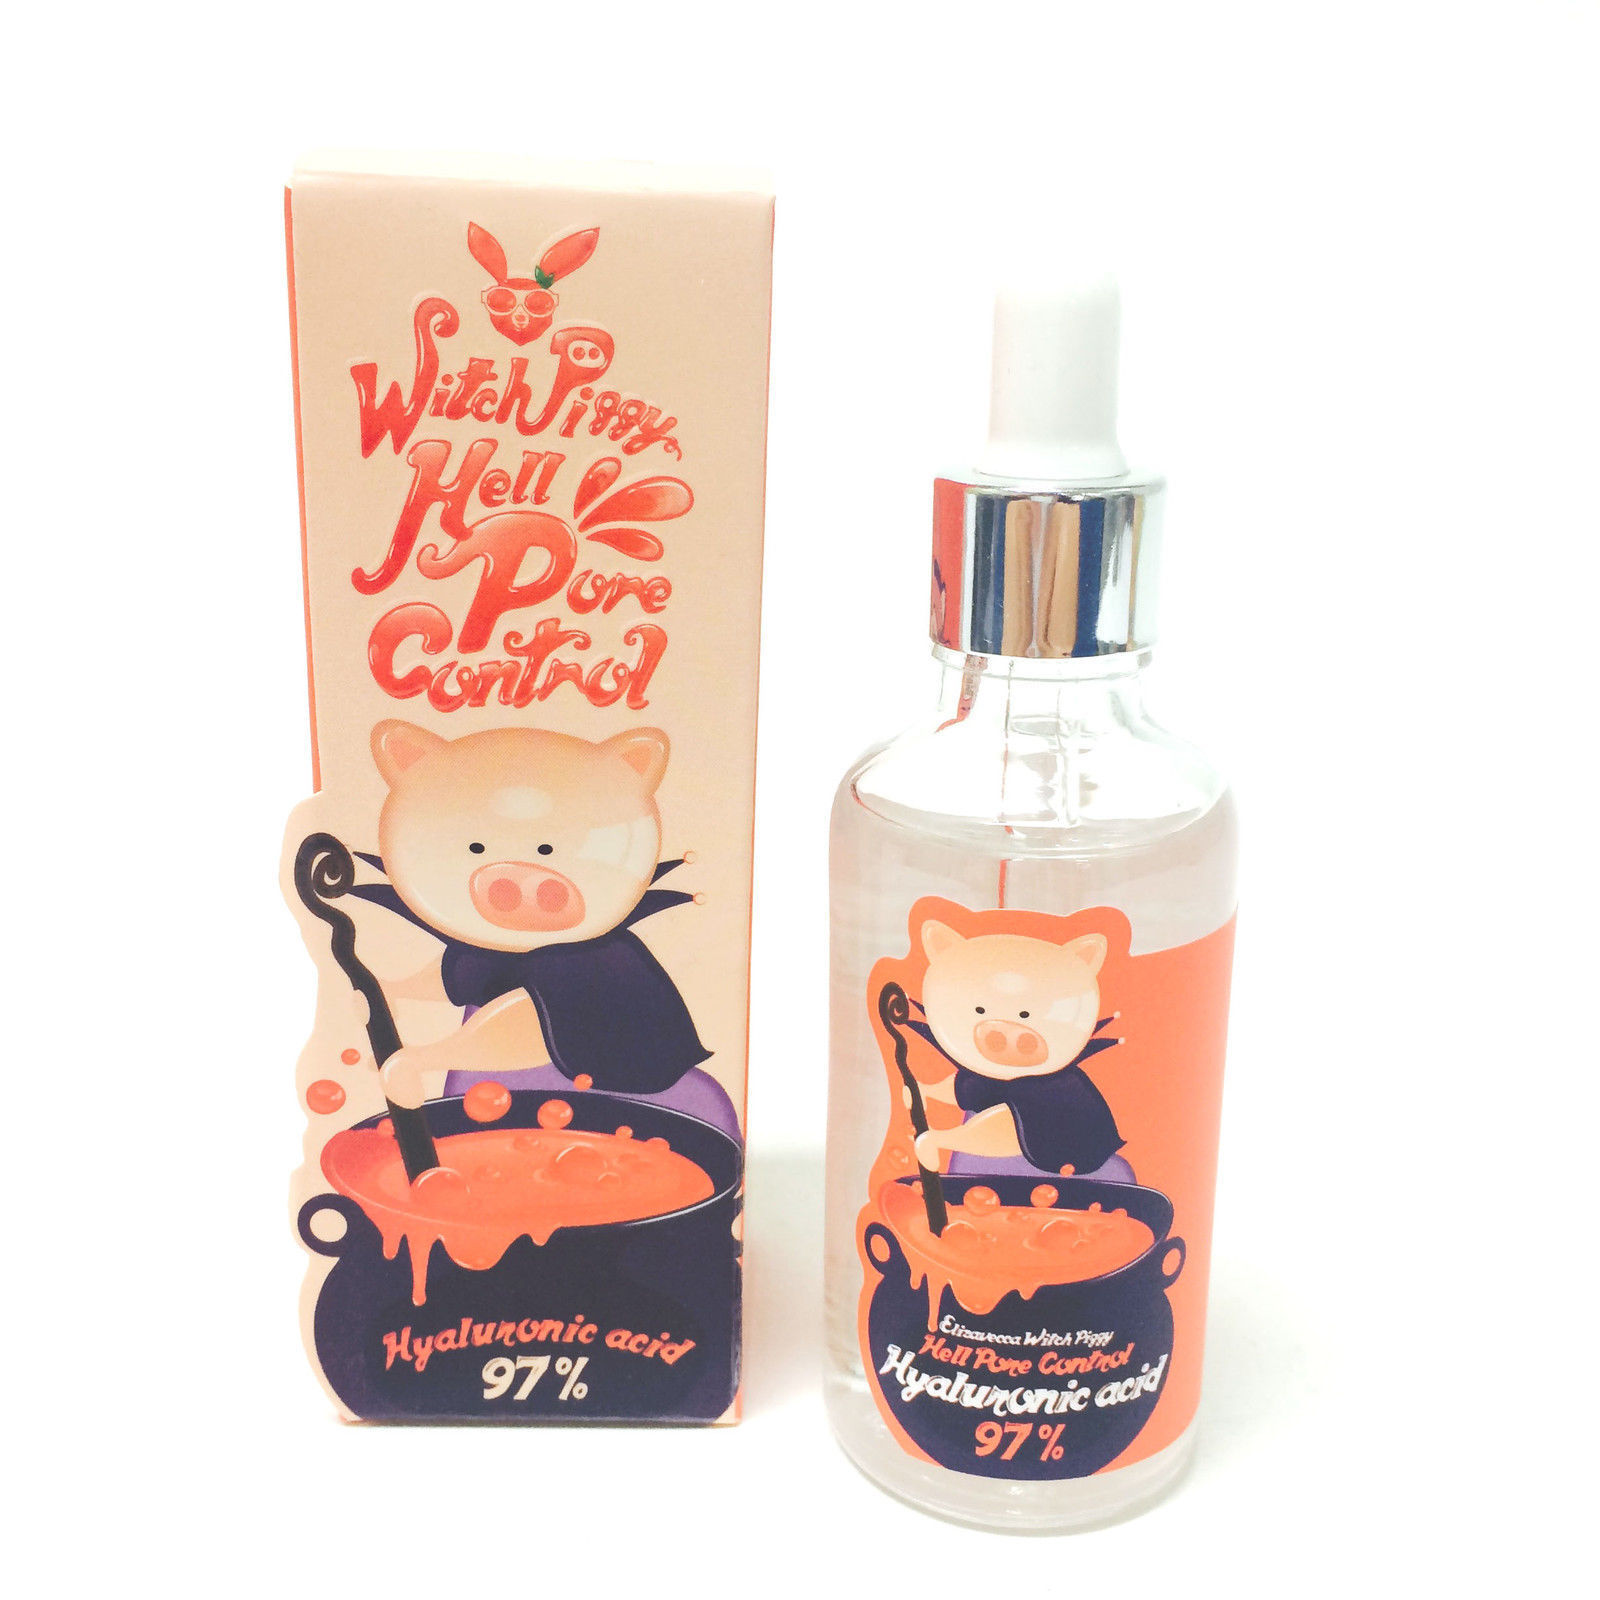 50ml Korean Cosmetic Witch Piggy Hell Pore Control Hyaluronic Acid 97% Face Serum Crean Skin Care Facial Essence